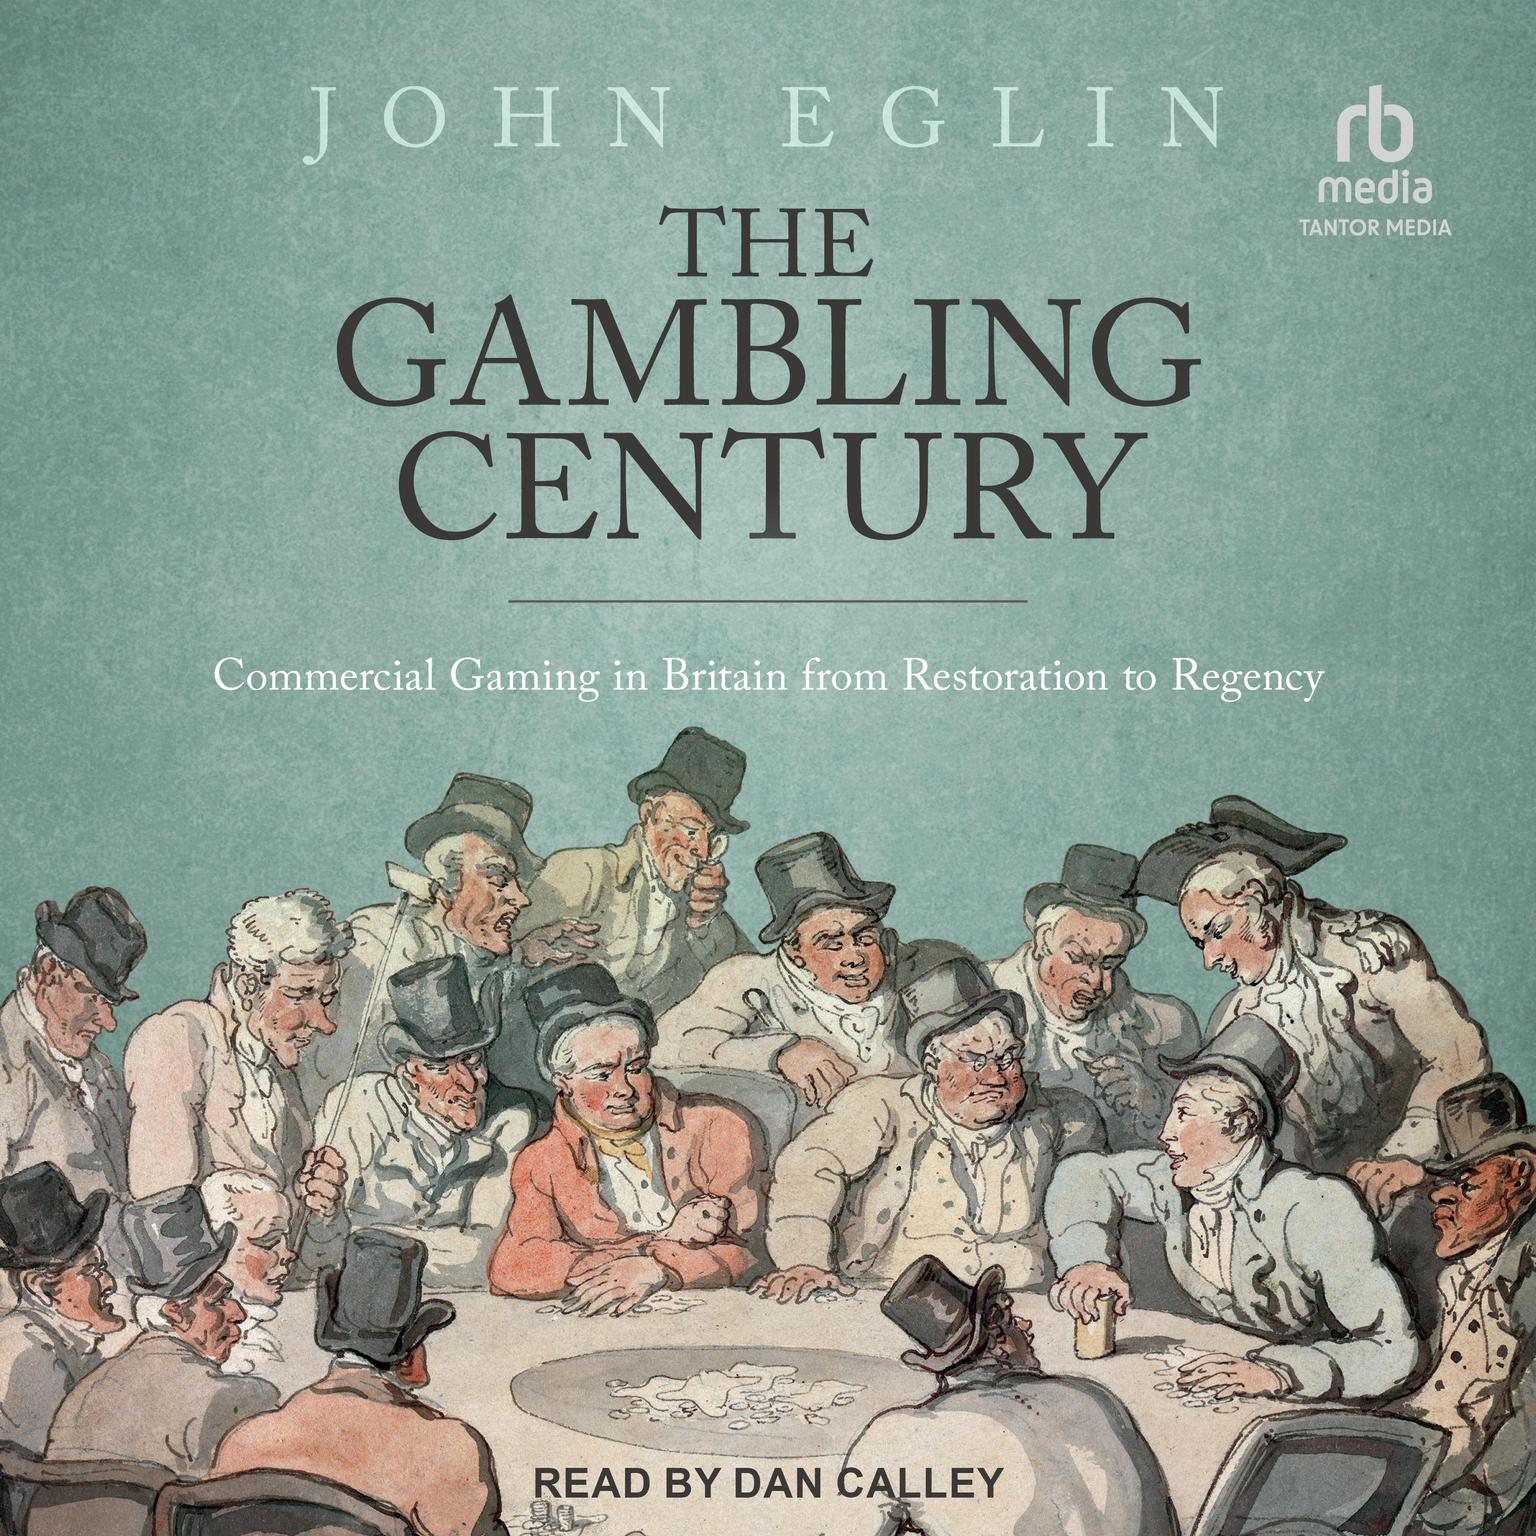 The Gambling Century: Commercial Gaming in Britain from Restoration to Regency Audiobook, by John Eglin